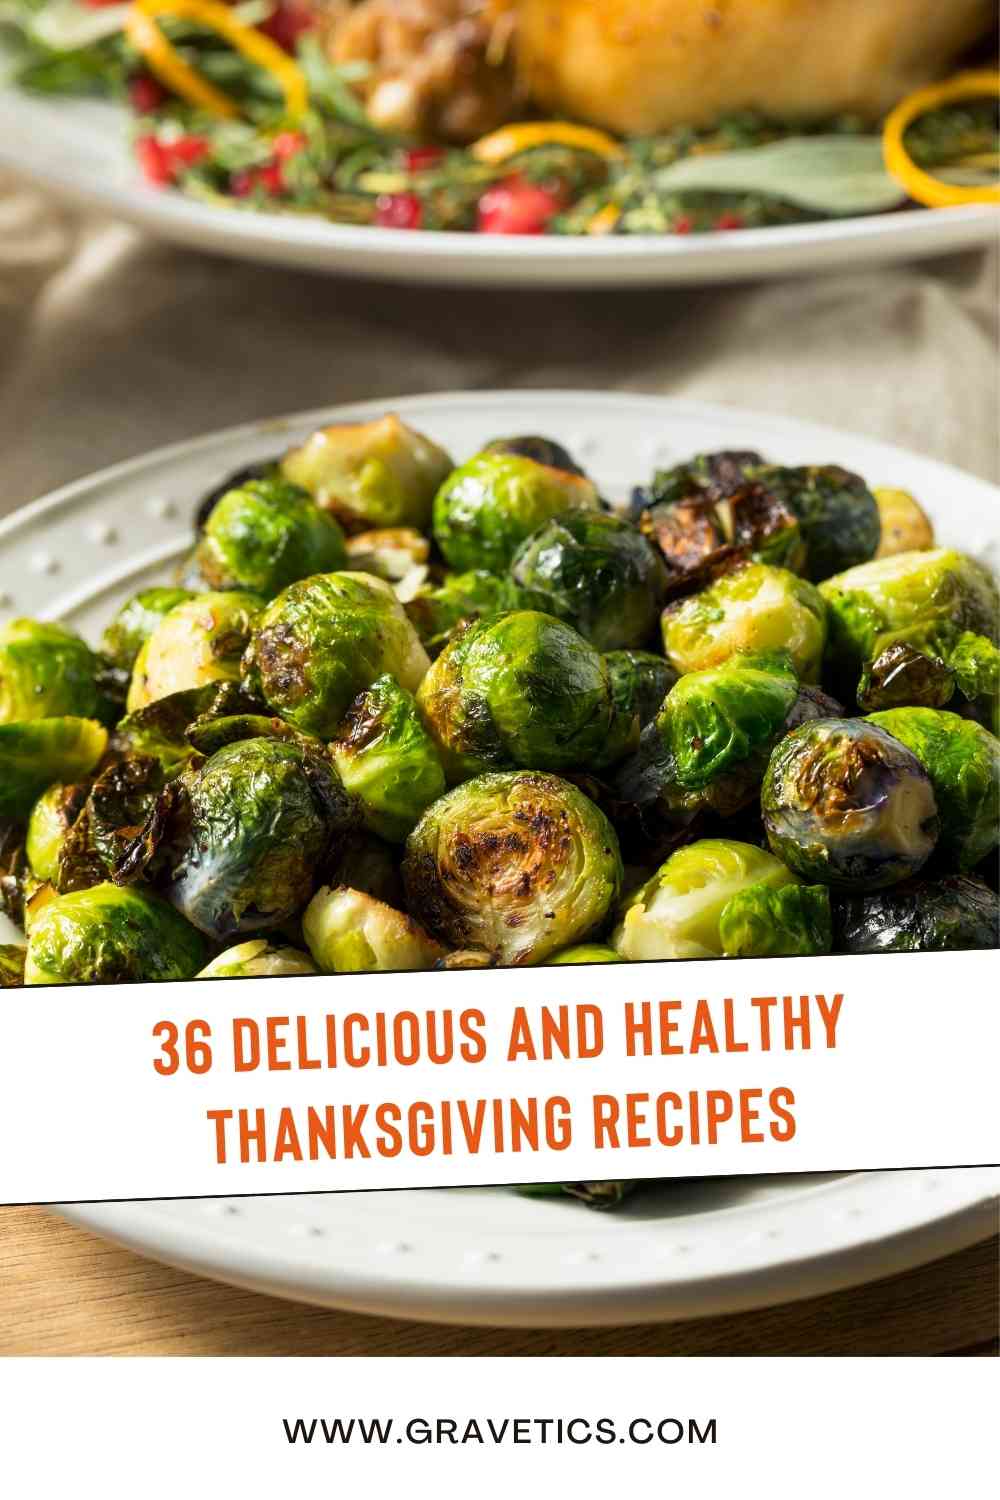 36 Delicious and Healthy Thanksgiving Recipes